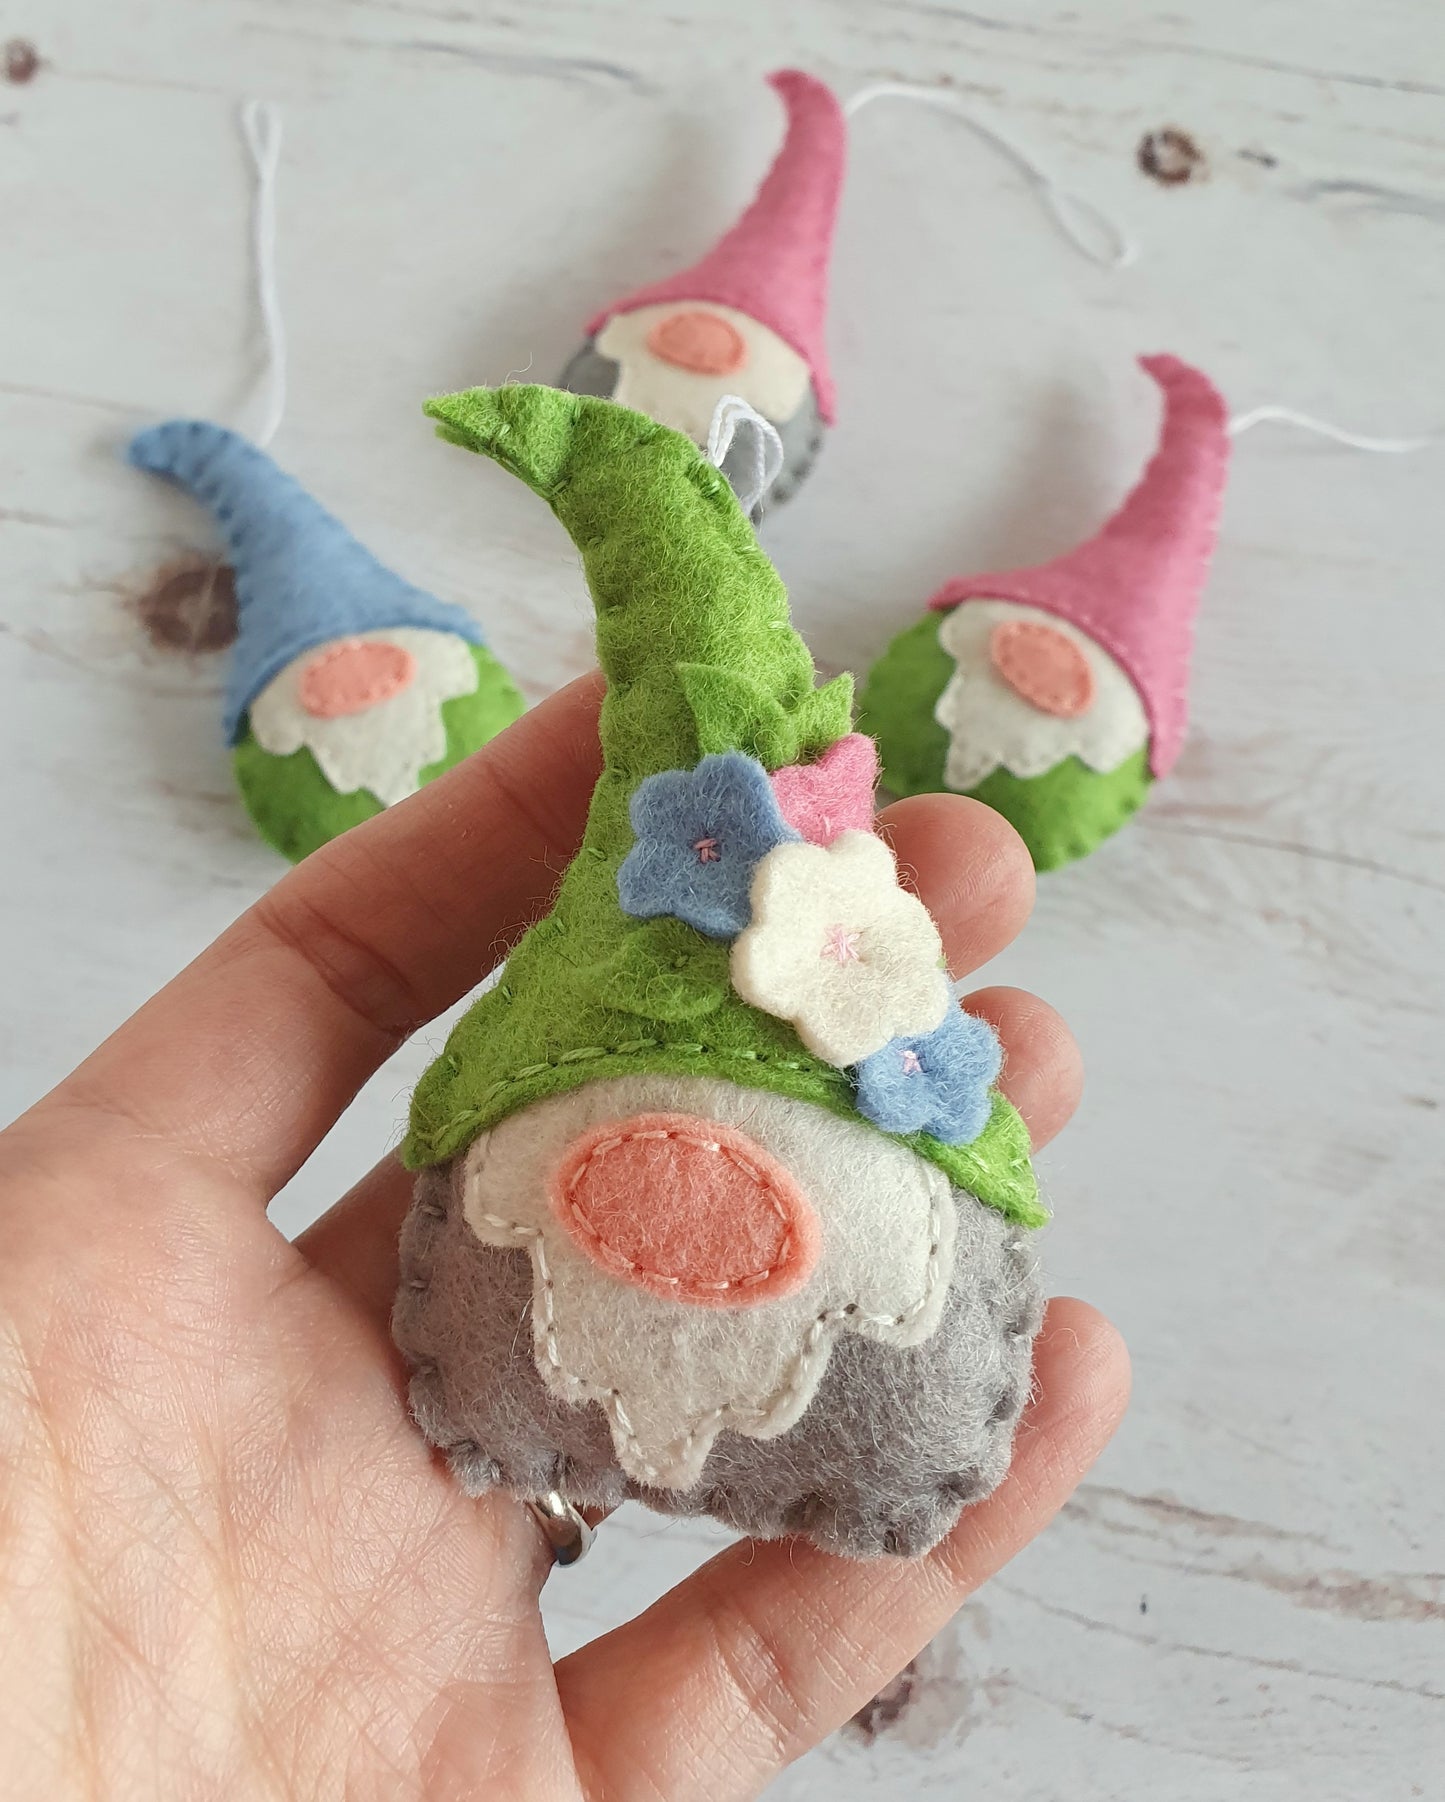 Spring gnomes - Felt elf ornaments with small flowers on their hat